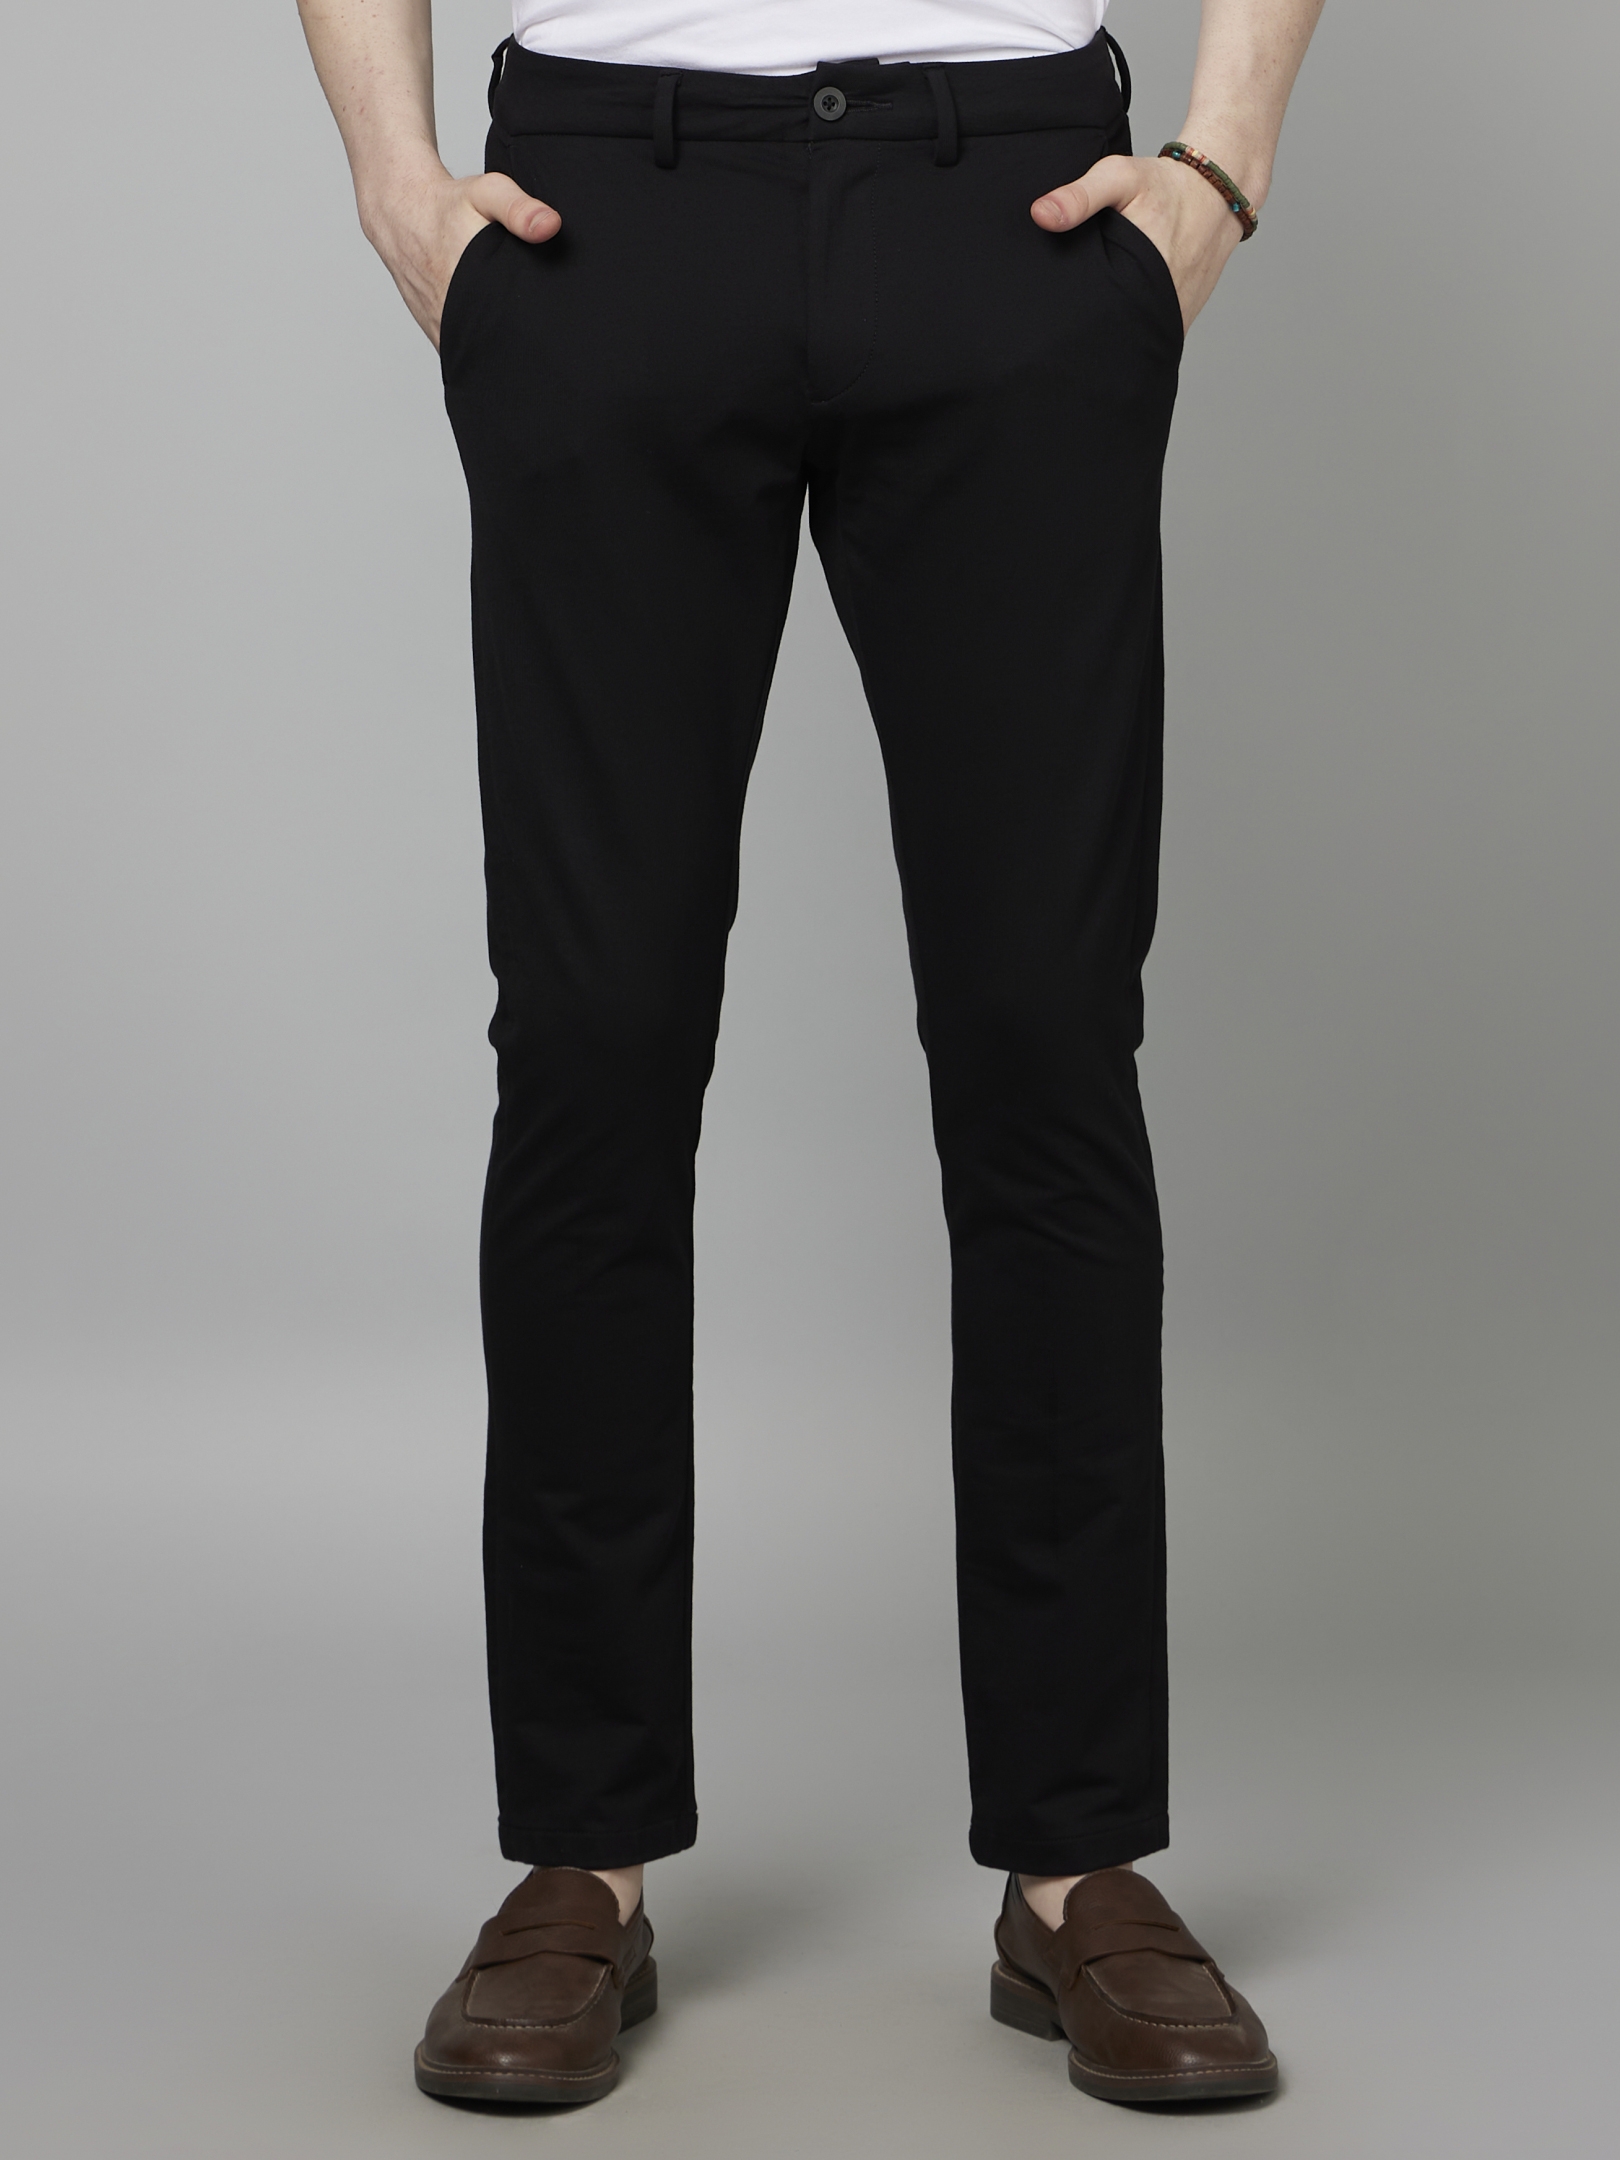 Wool trousers - high-quality trousers made of wool - Chevalier